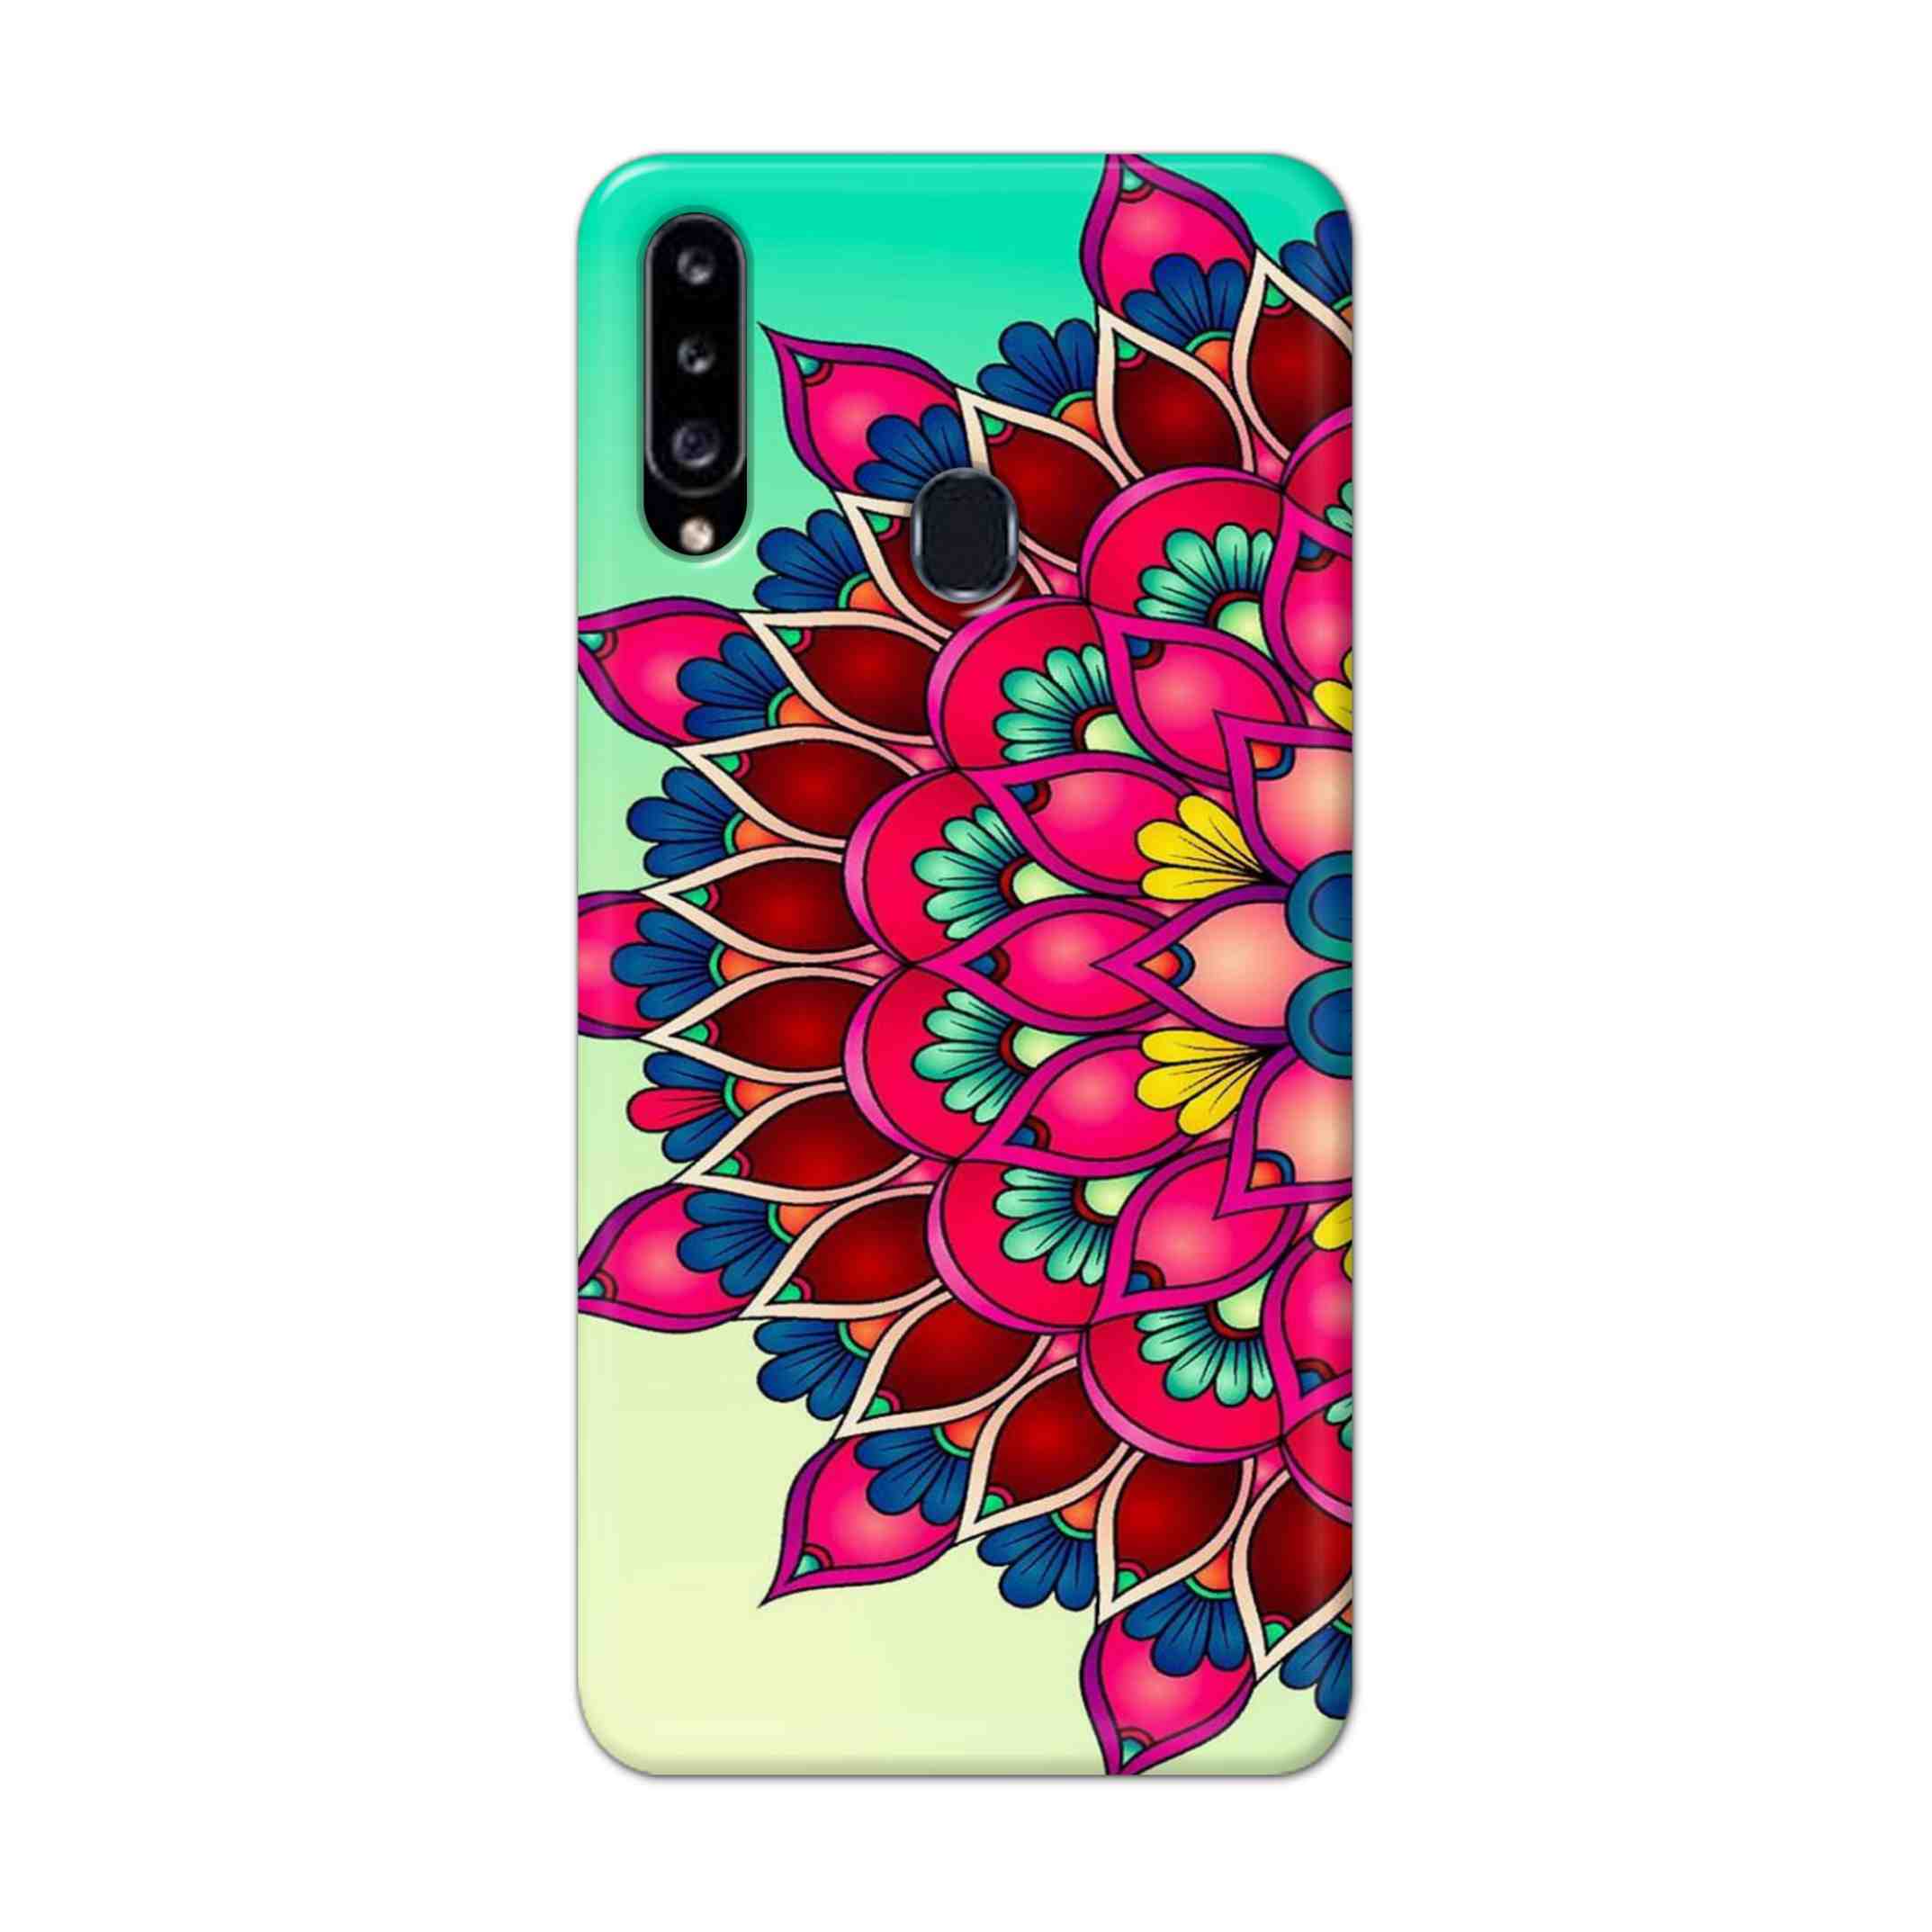 Buy Lotus Mandala Hard Back Mobile Phone Case Cover For Samsung Galaxy A21 Online